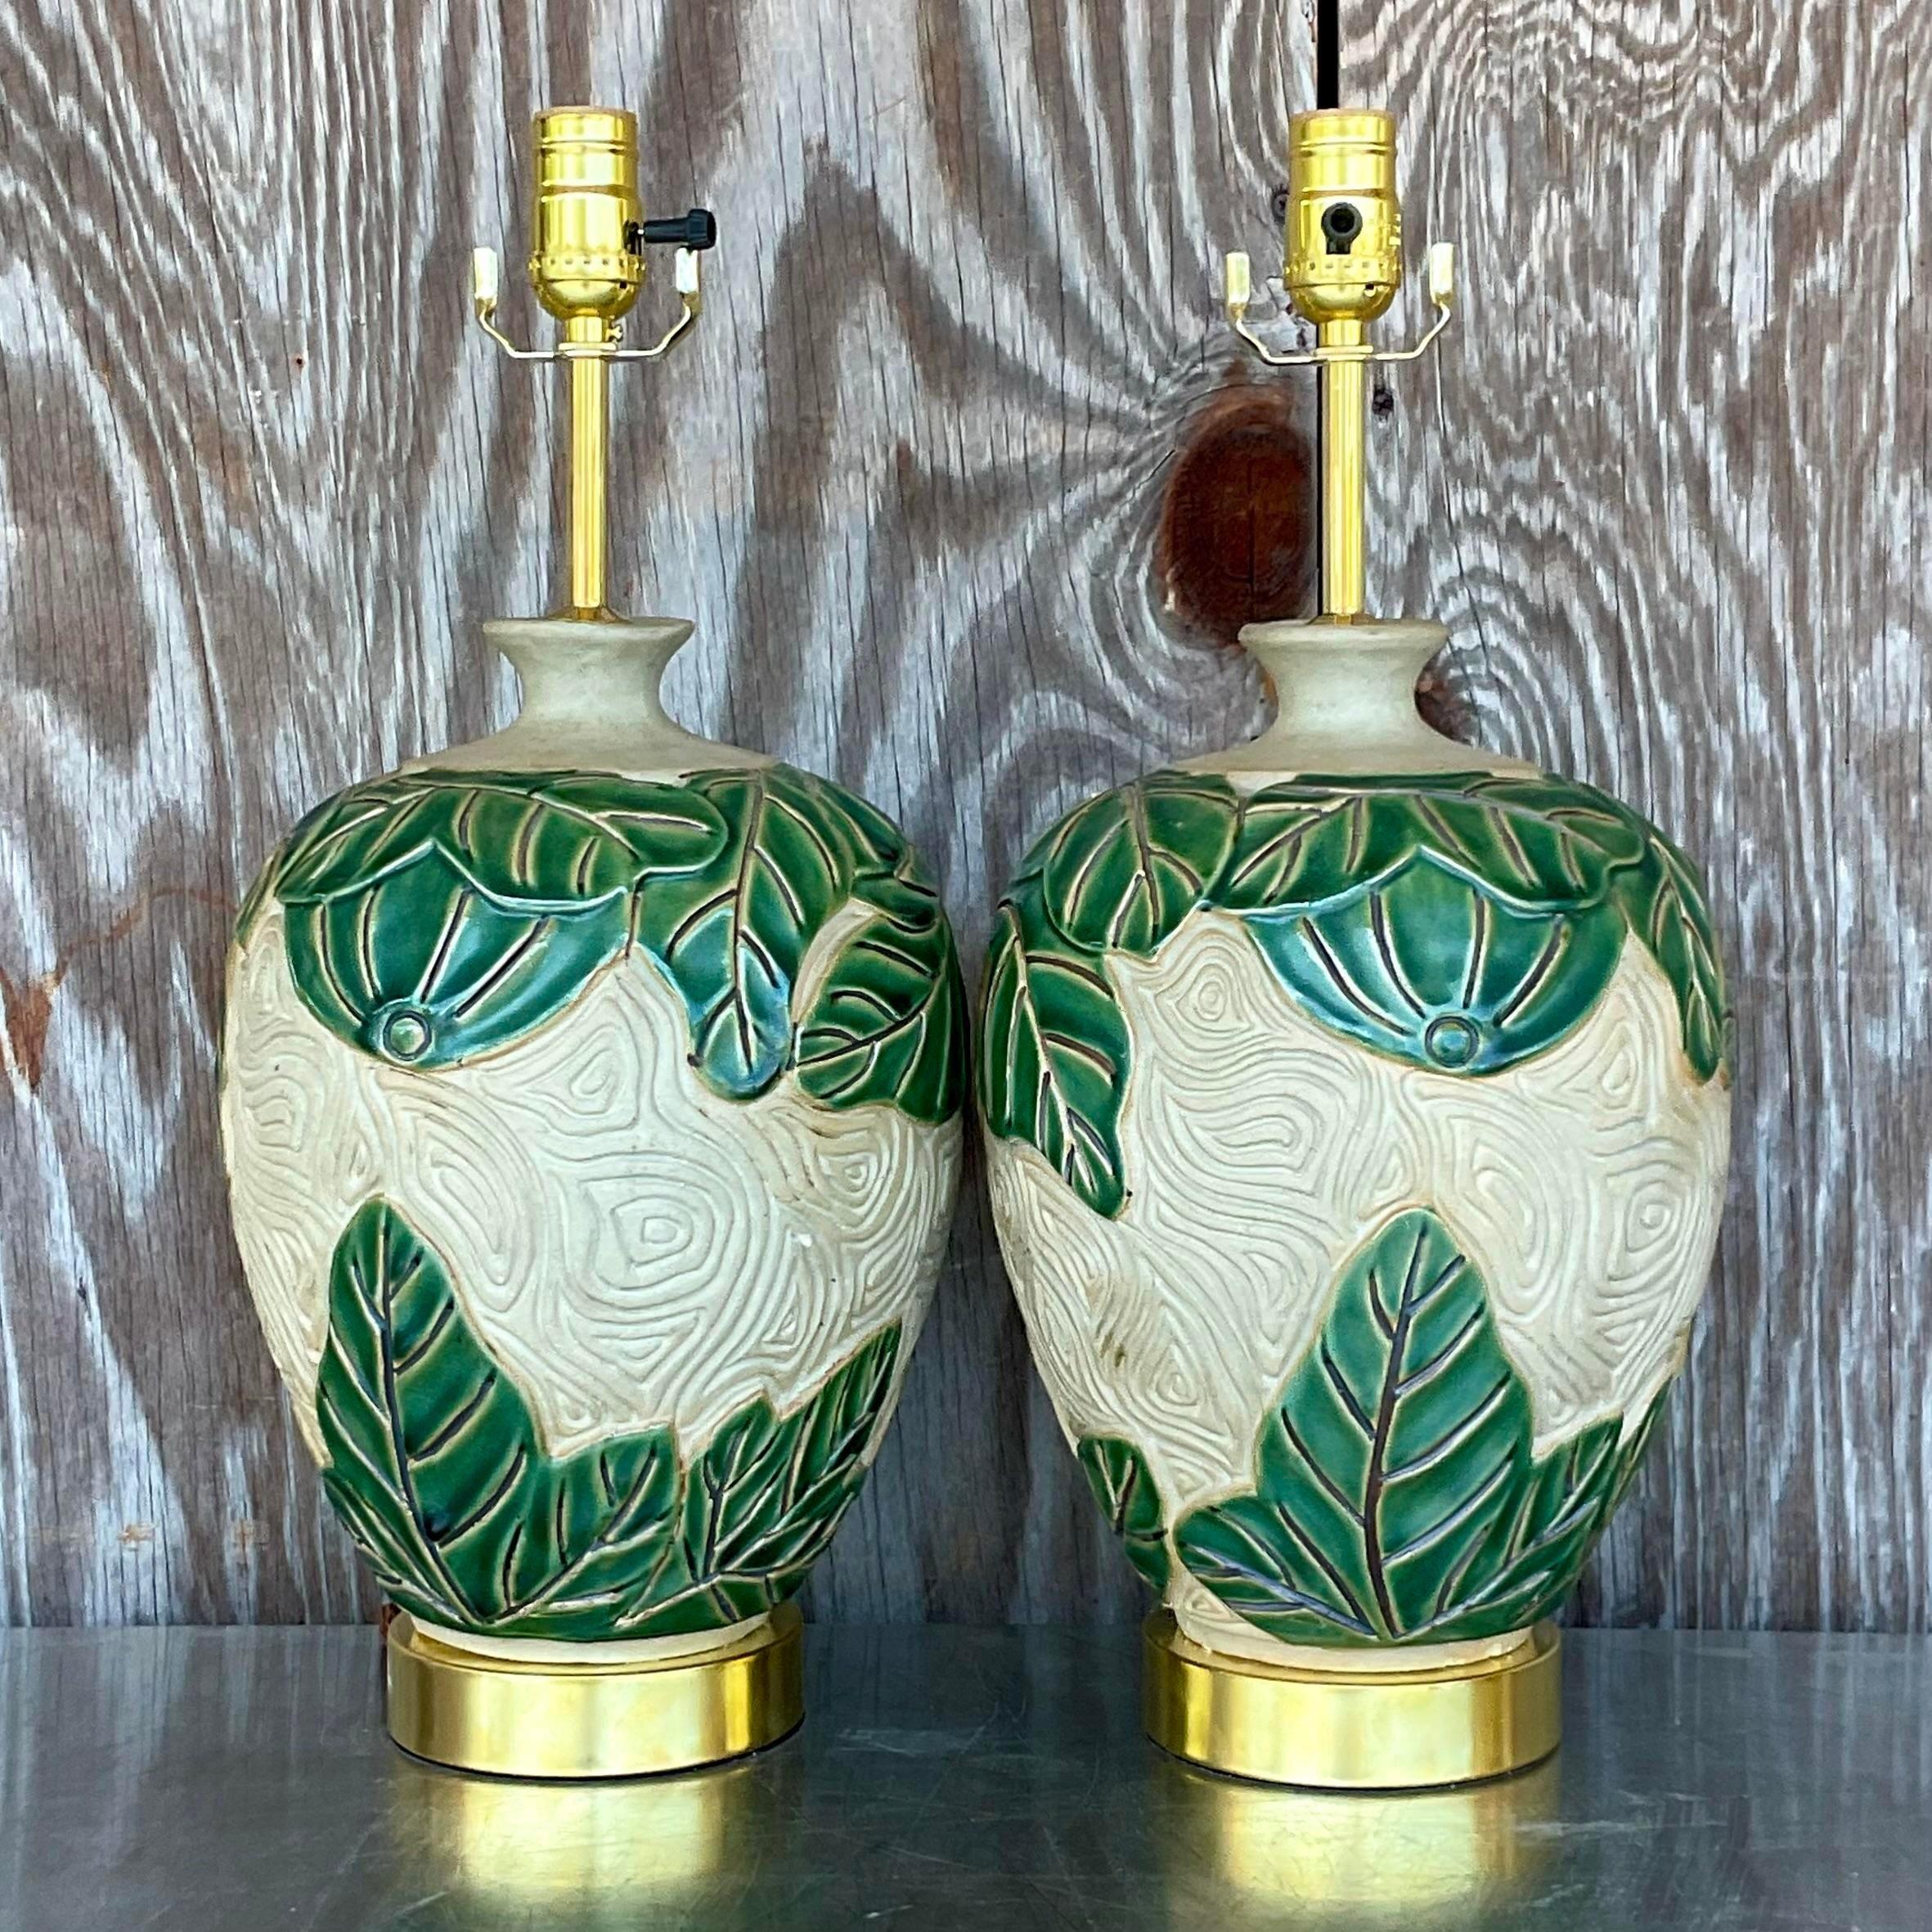 A fabulous pair of vintage Coastal table lamps. A chic tropical leaf design with a combo of glazed and matte finishes. Fully restored with all now hardware and wiring and gilt plinth. Acquired from a Palm Beach estate.